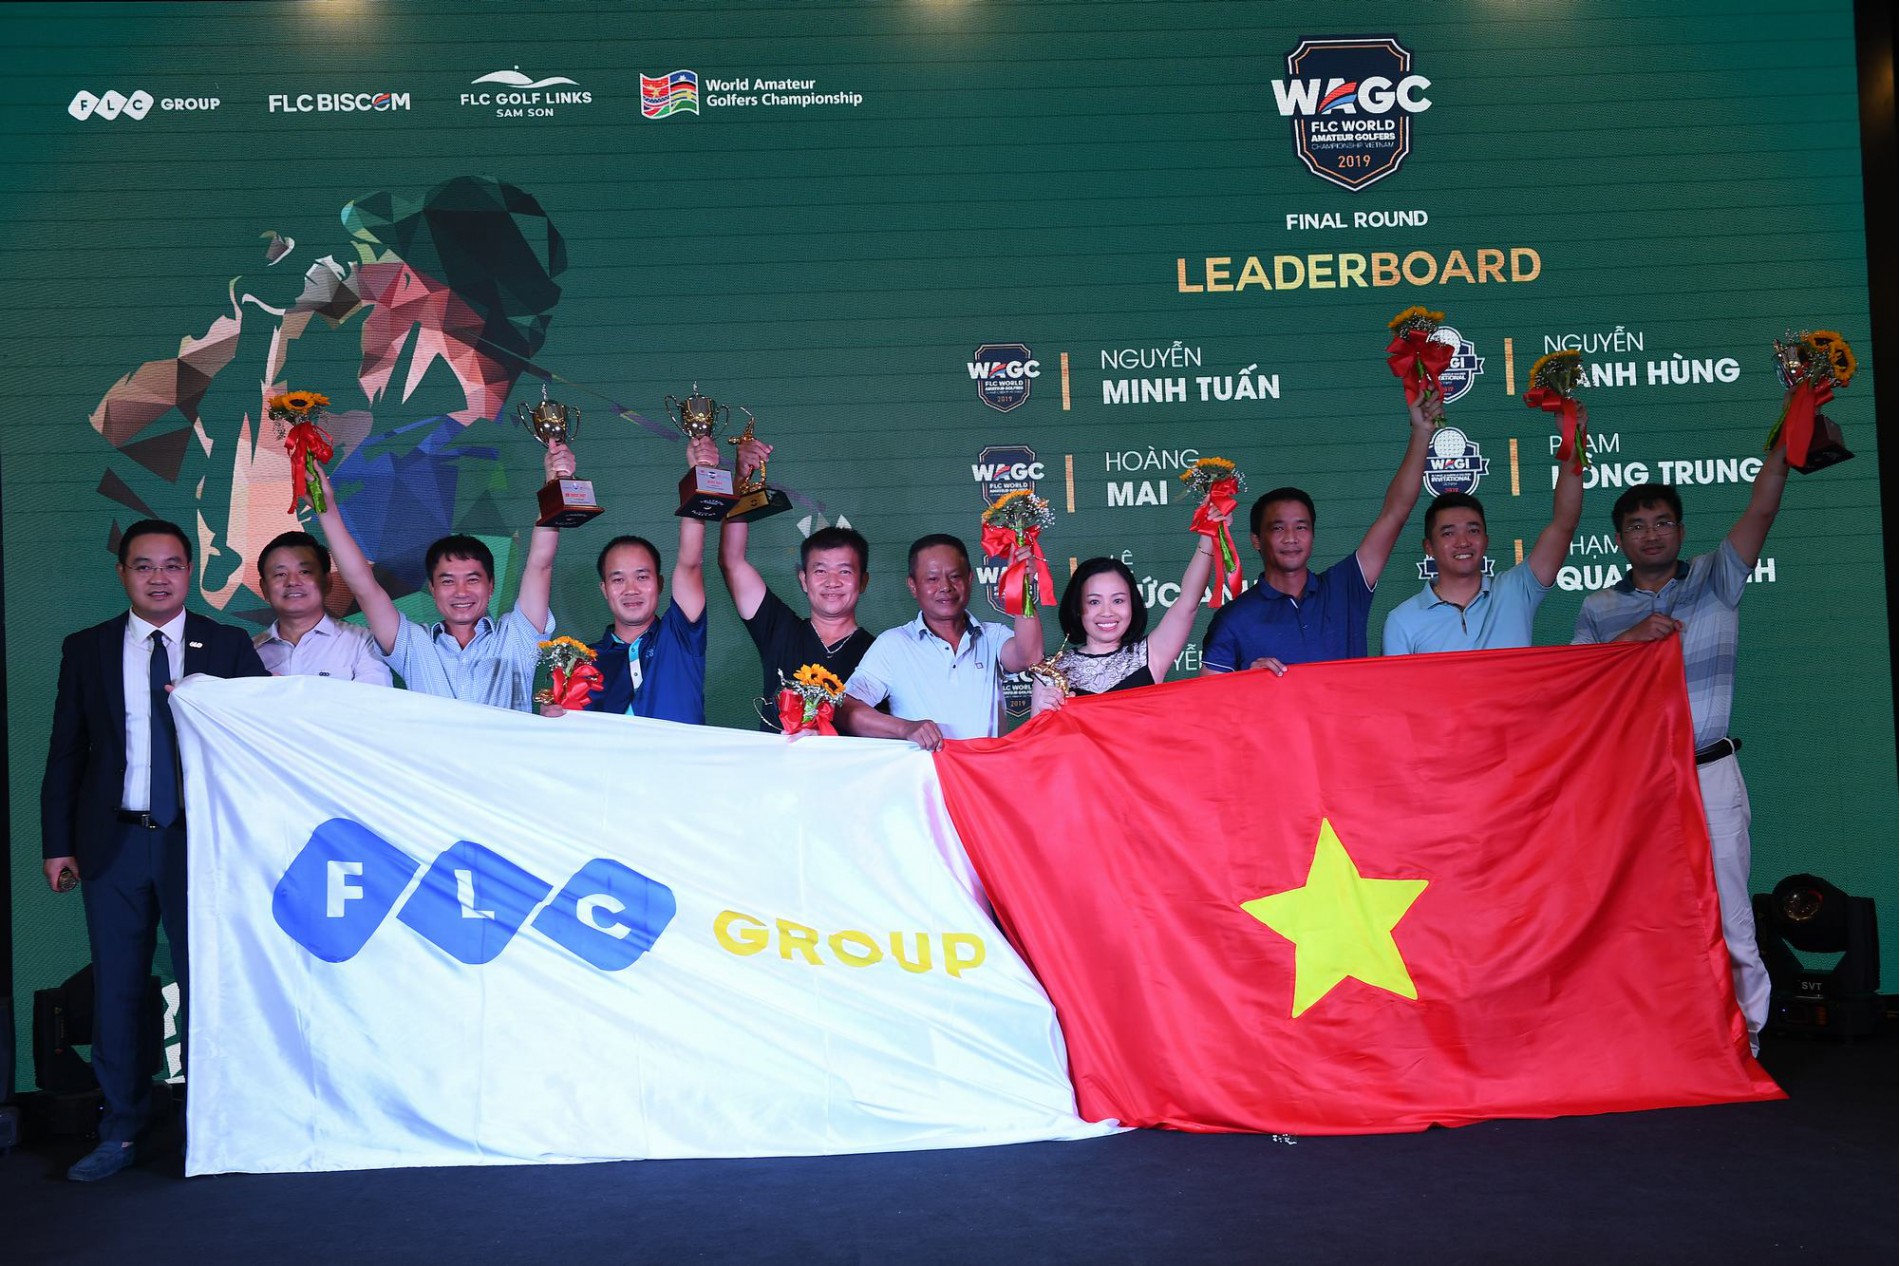 8 representative golfers of Vietnam to play at 2019 WAGC were awarded by Mr Do Viet Hung - CEO of FLC Biscom.